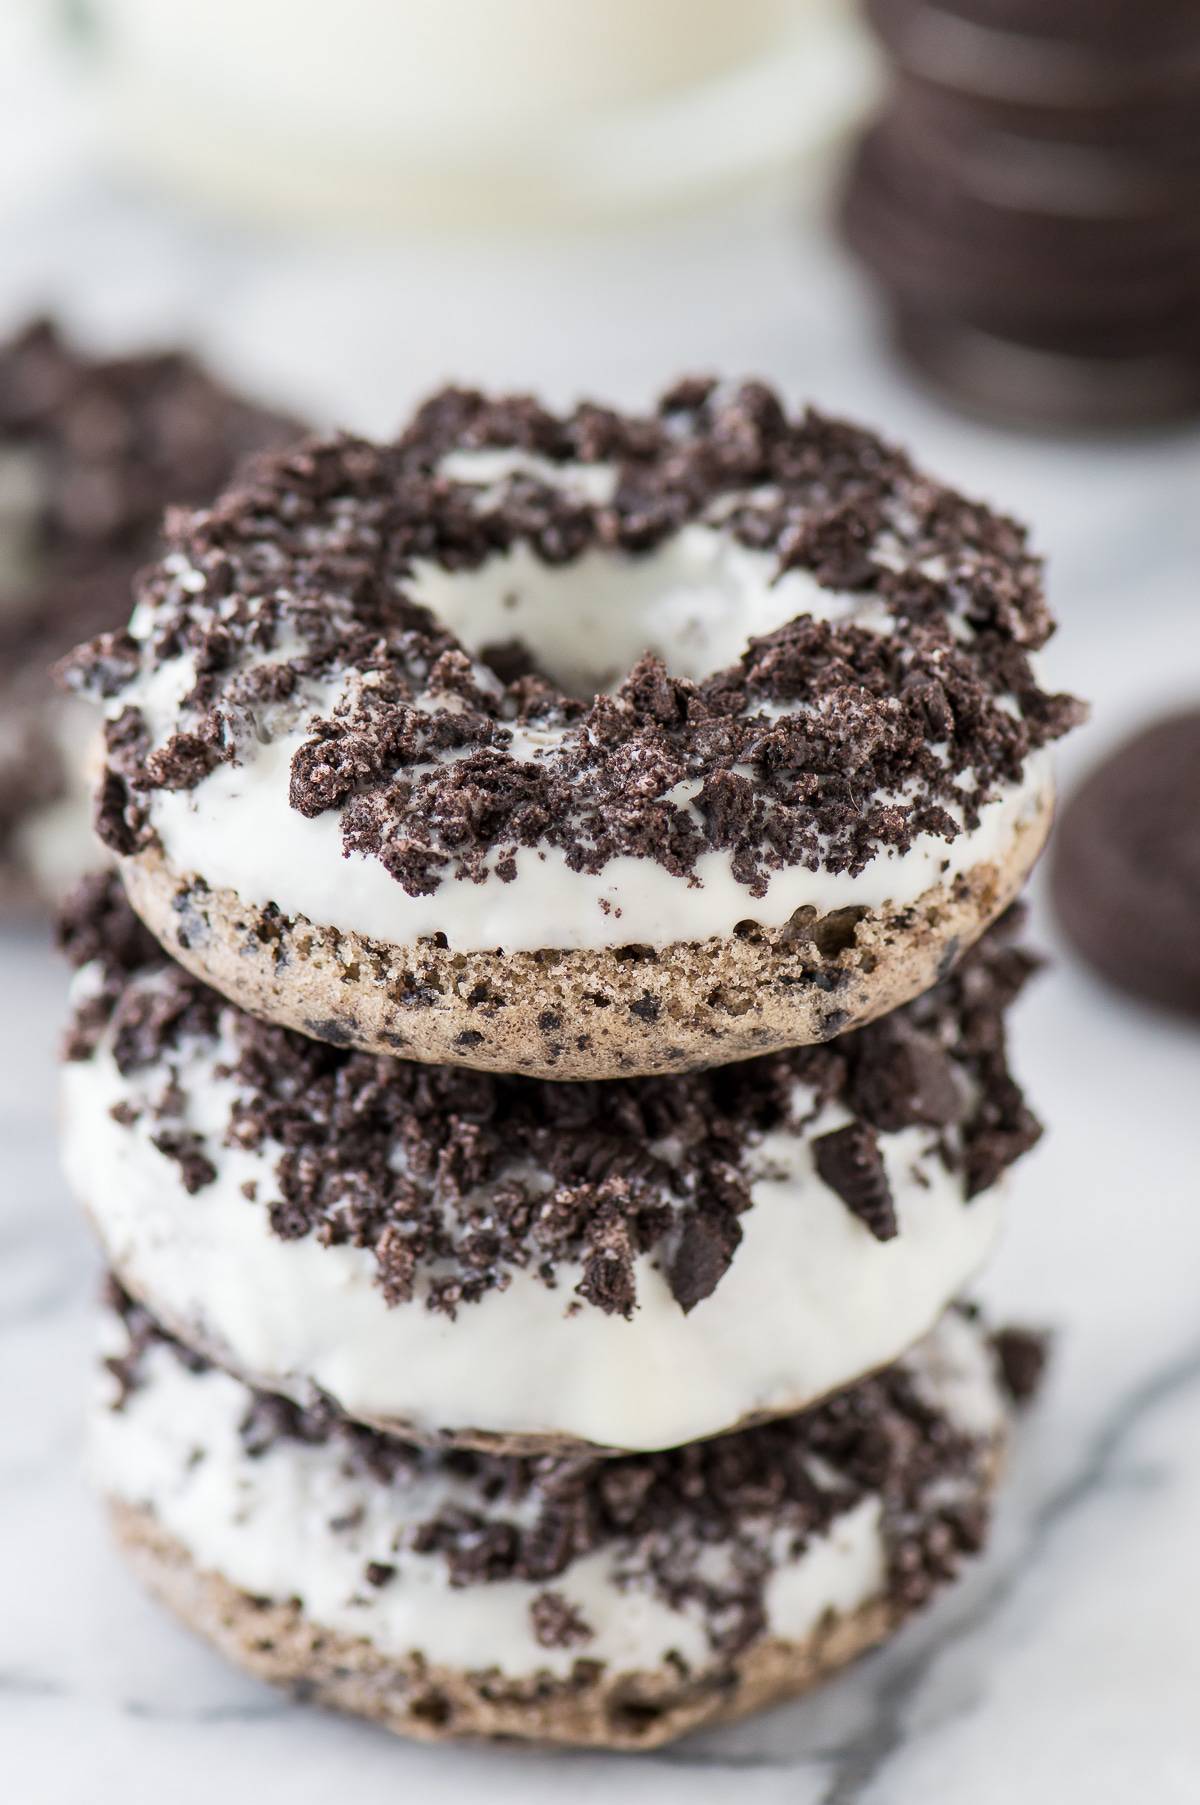 The BEST oreo donut! Oreos in the batter and crushed Oreos on top of the white chocolate - so delicious!